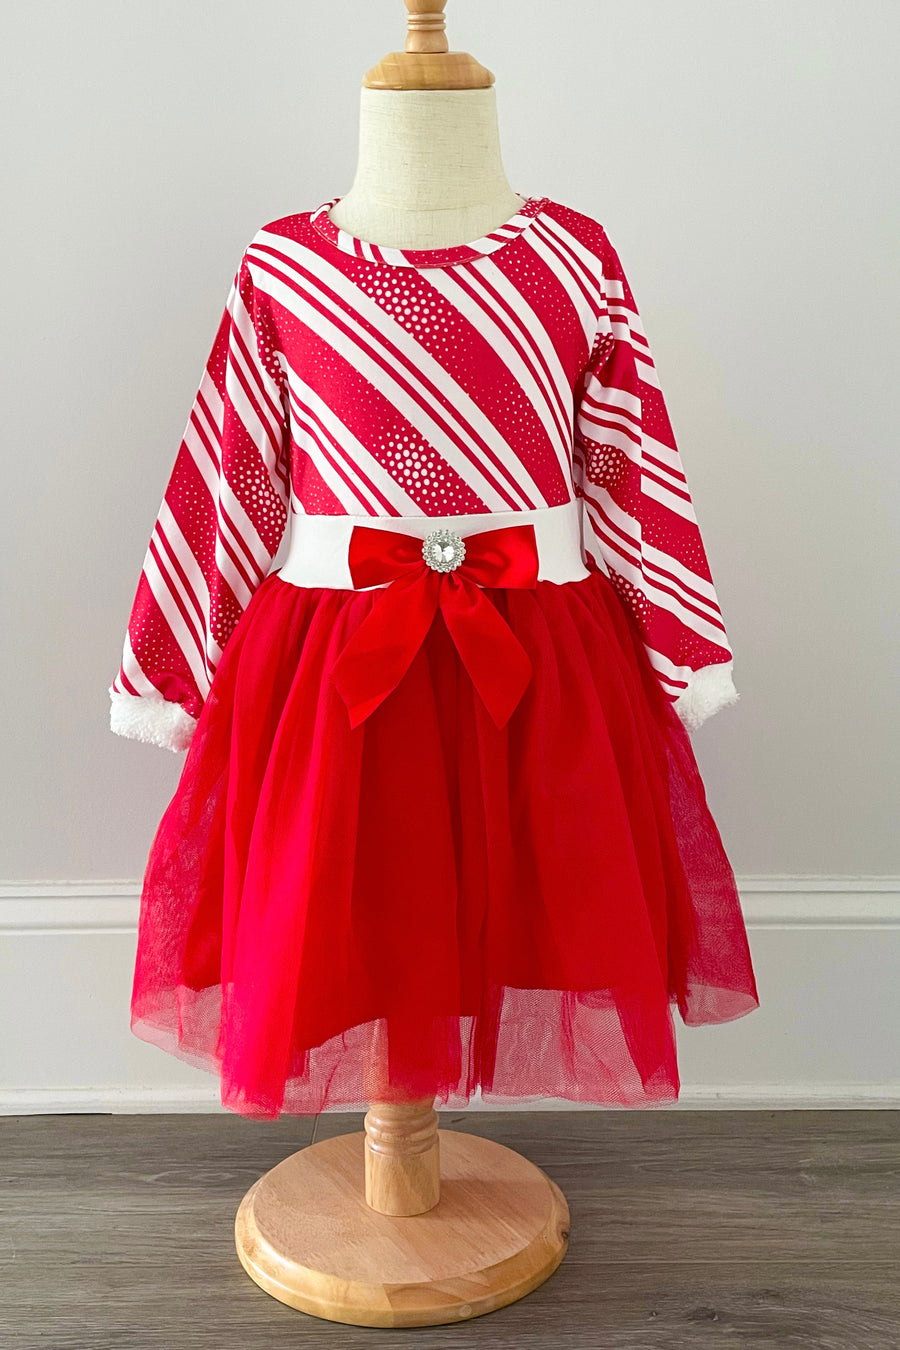 Candy Cane Cutie Tulle Dress